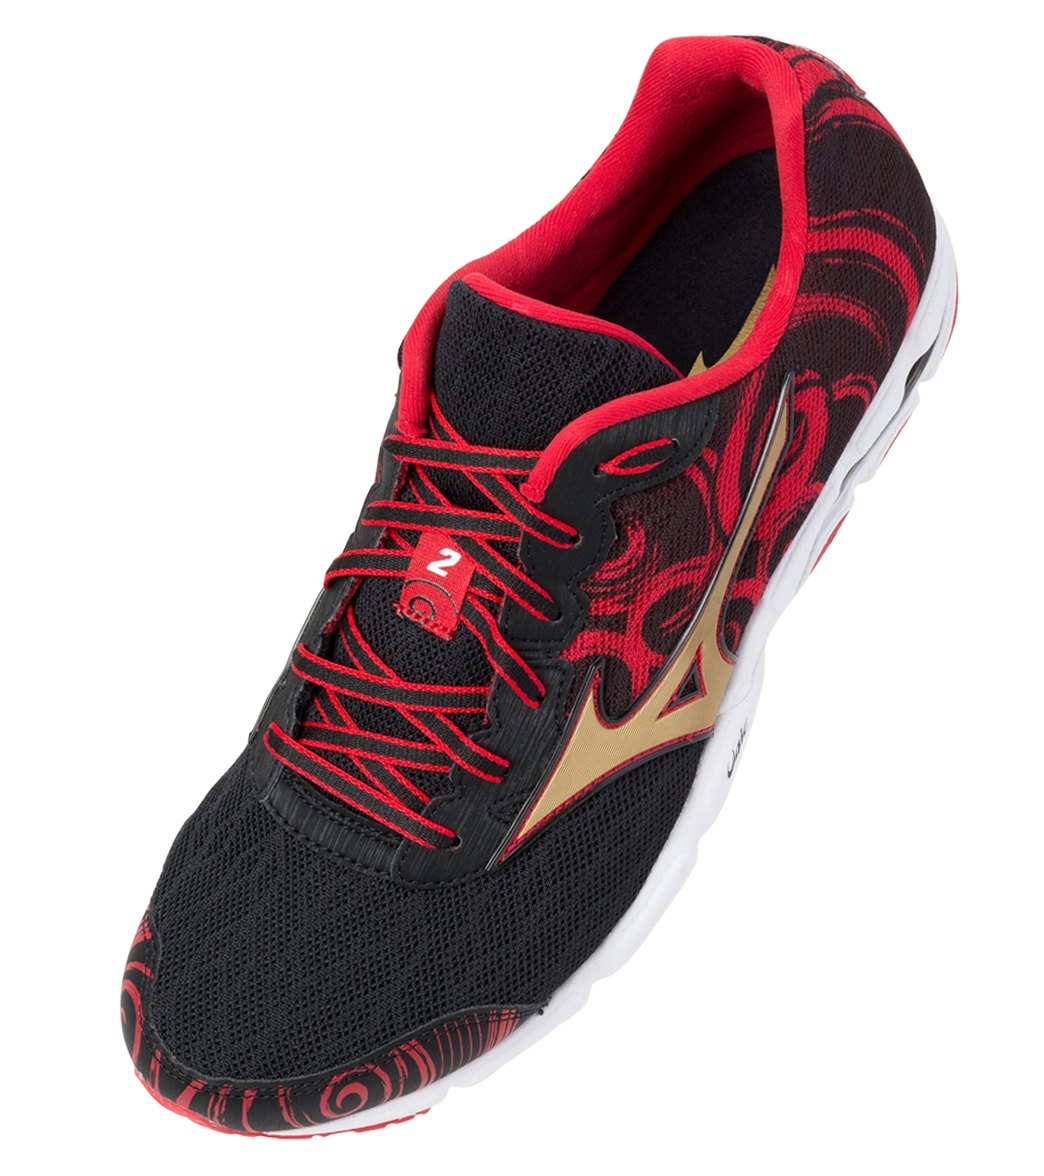 Mizuno Men's Wave Hitogami 2 Running Shoes at SwimOutlet.com